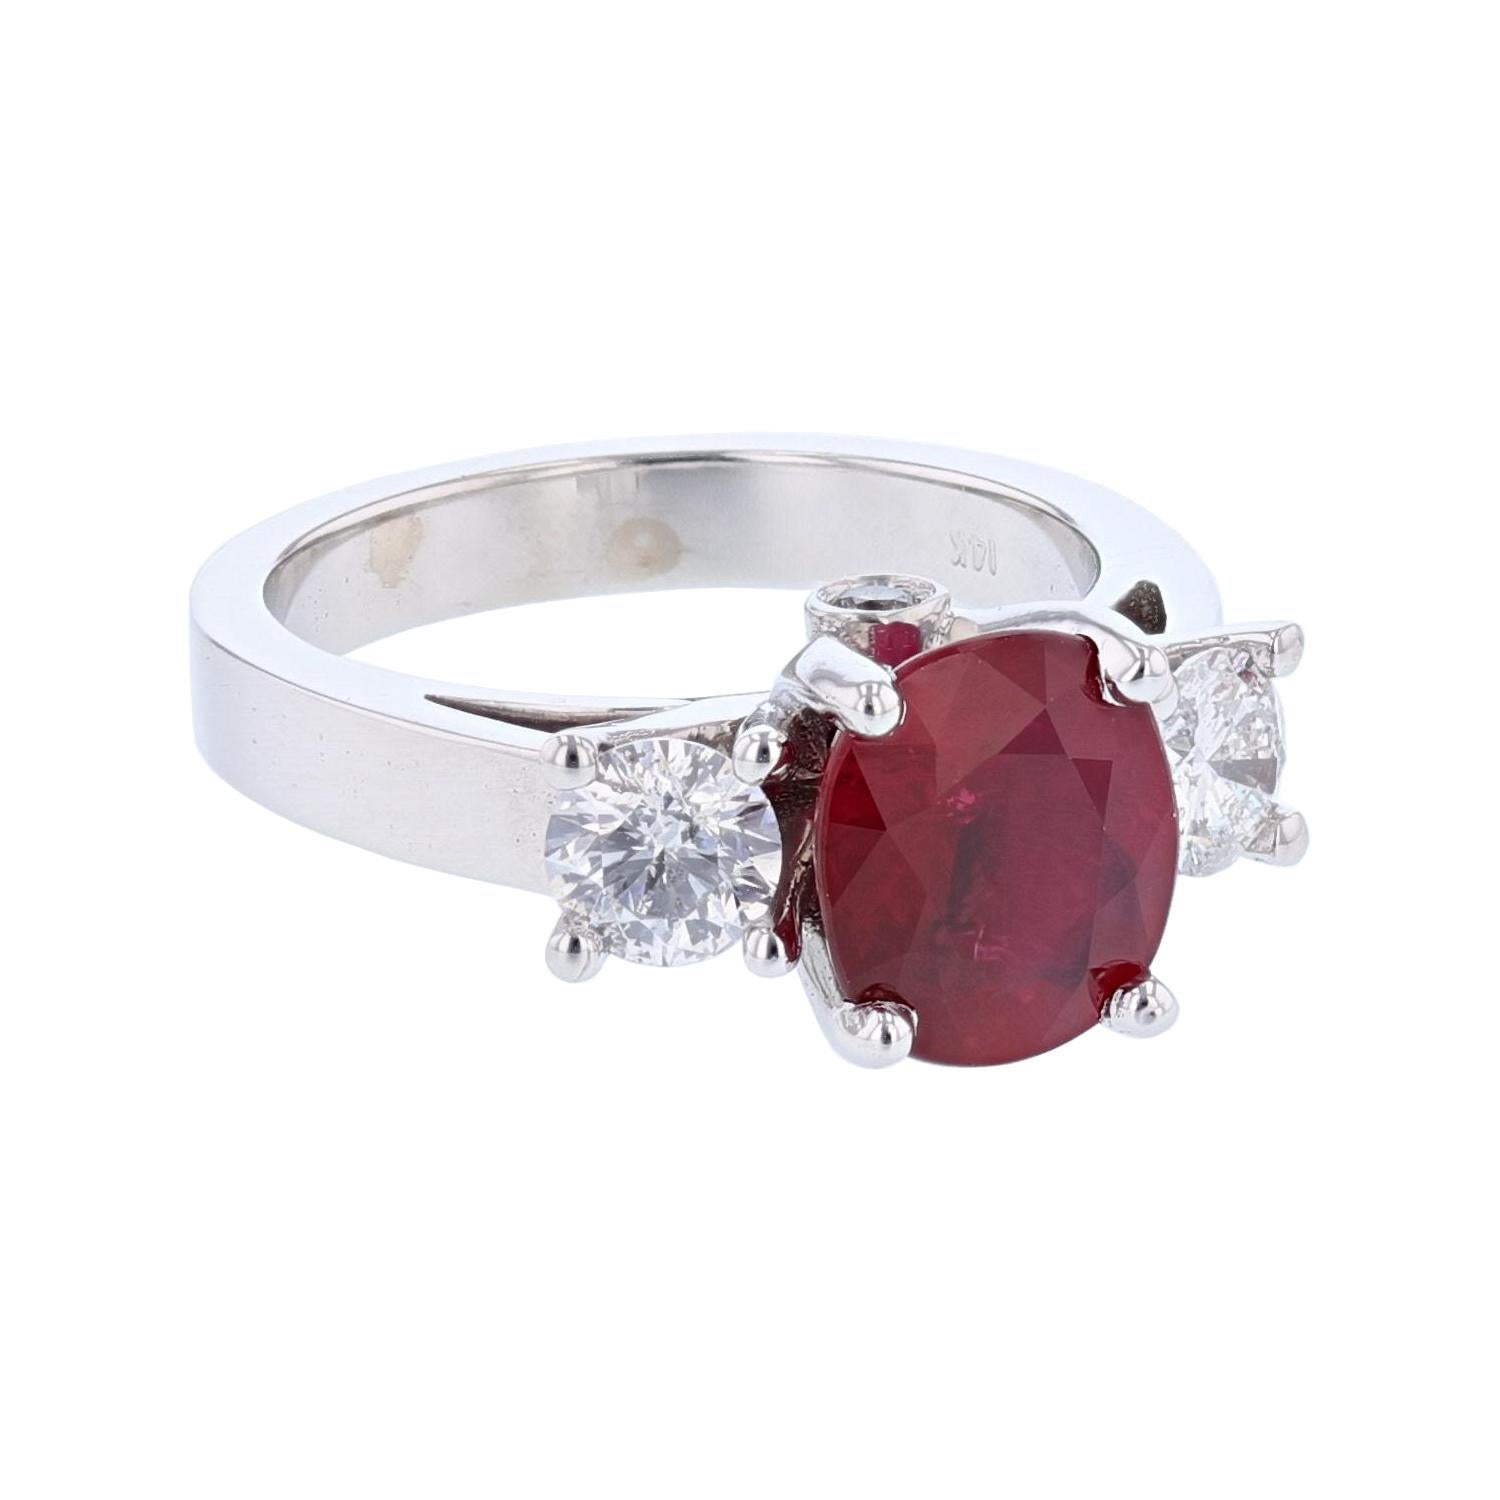 This ring is made in 14k white gold and features an Oval cut Ruby weighing 2.73ct with an AGL certificate. The certificate number is 